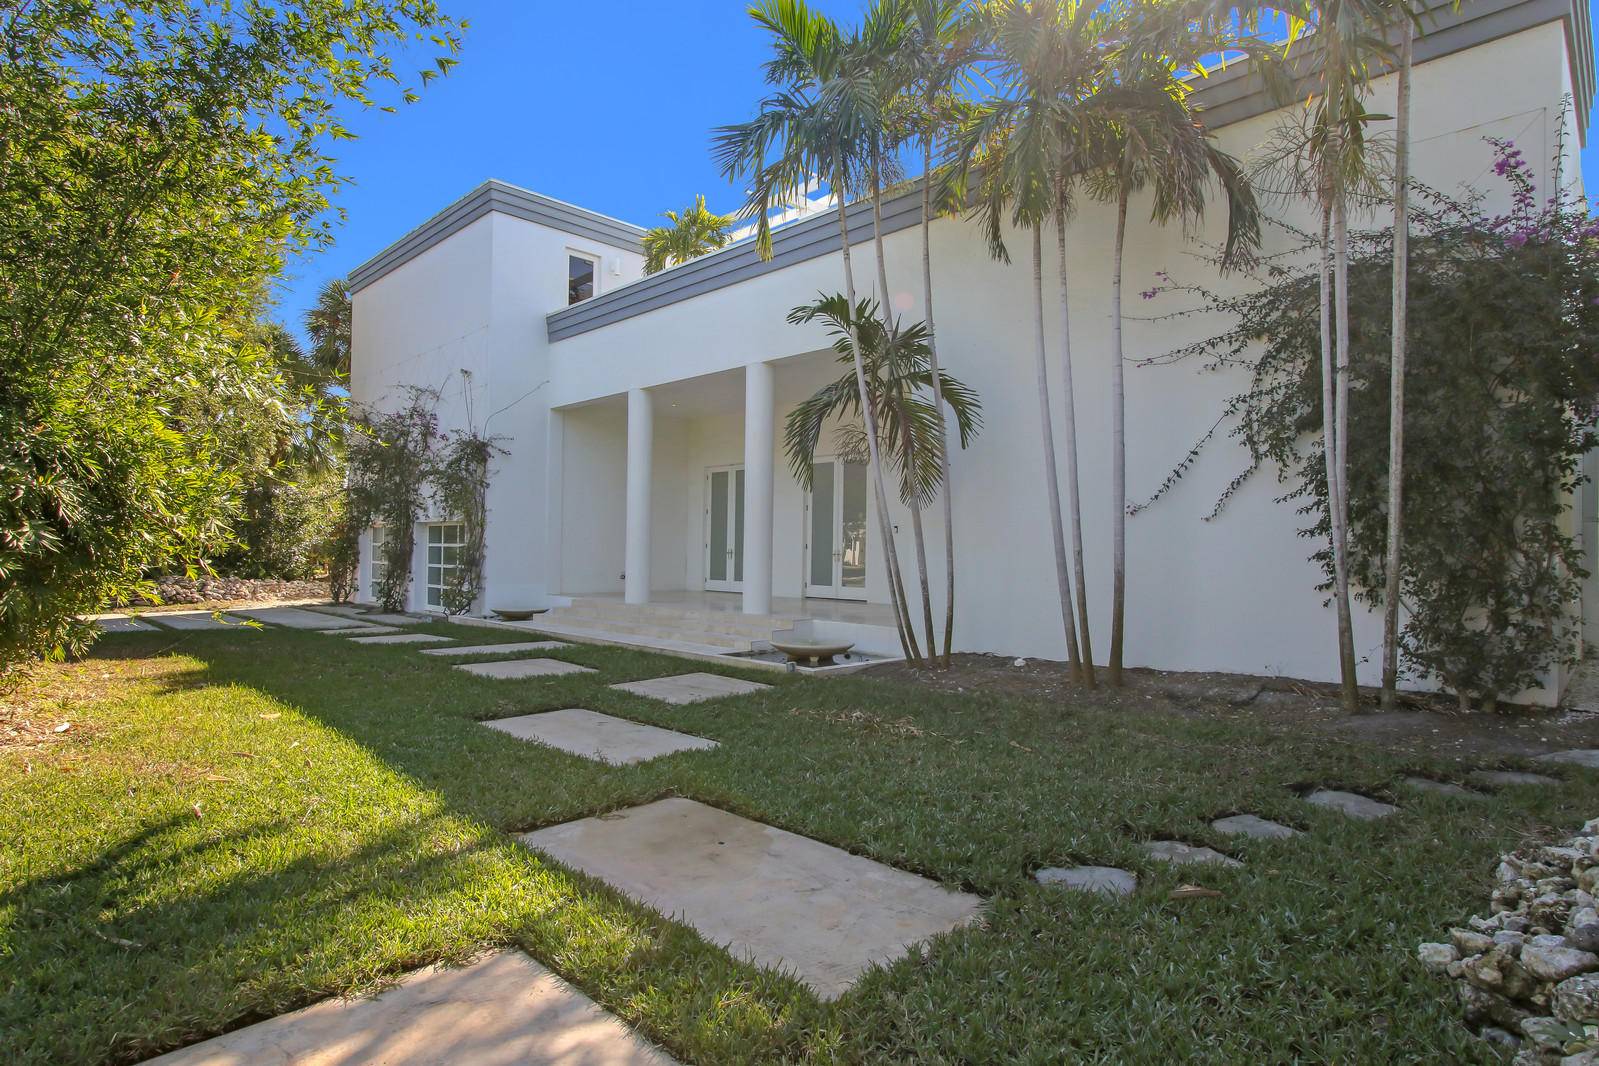 Stunning home in sought after South of Sothern area of West Palm Beach.